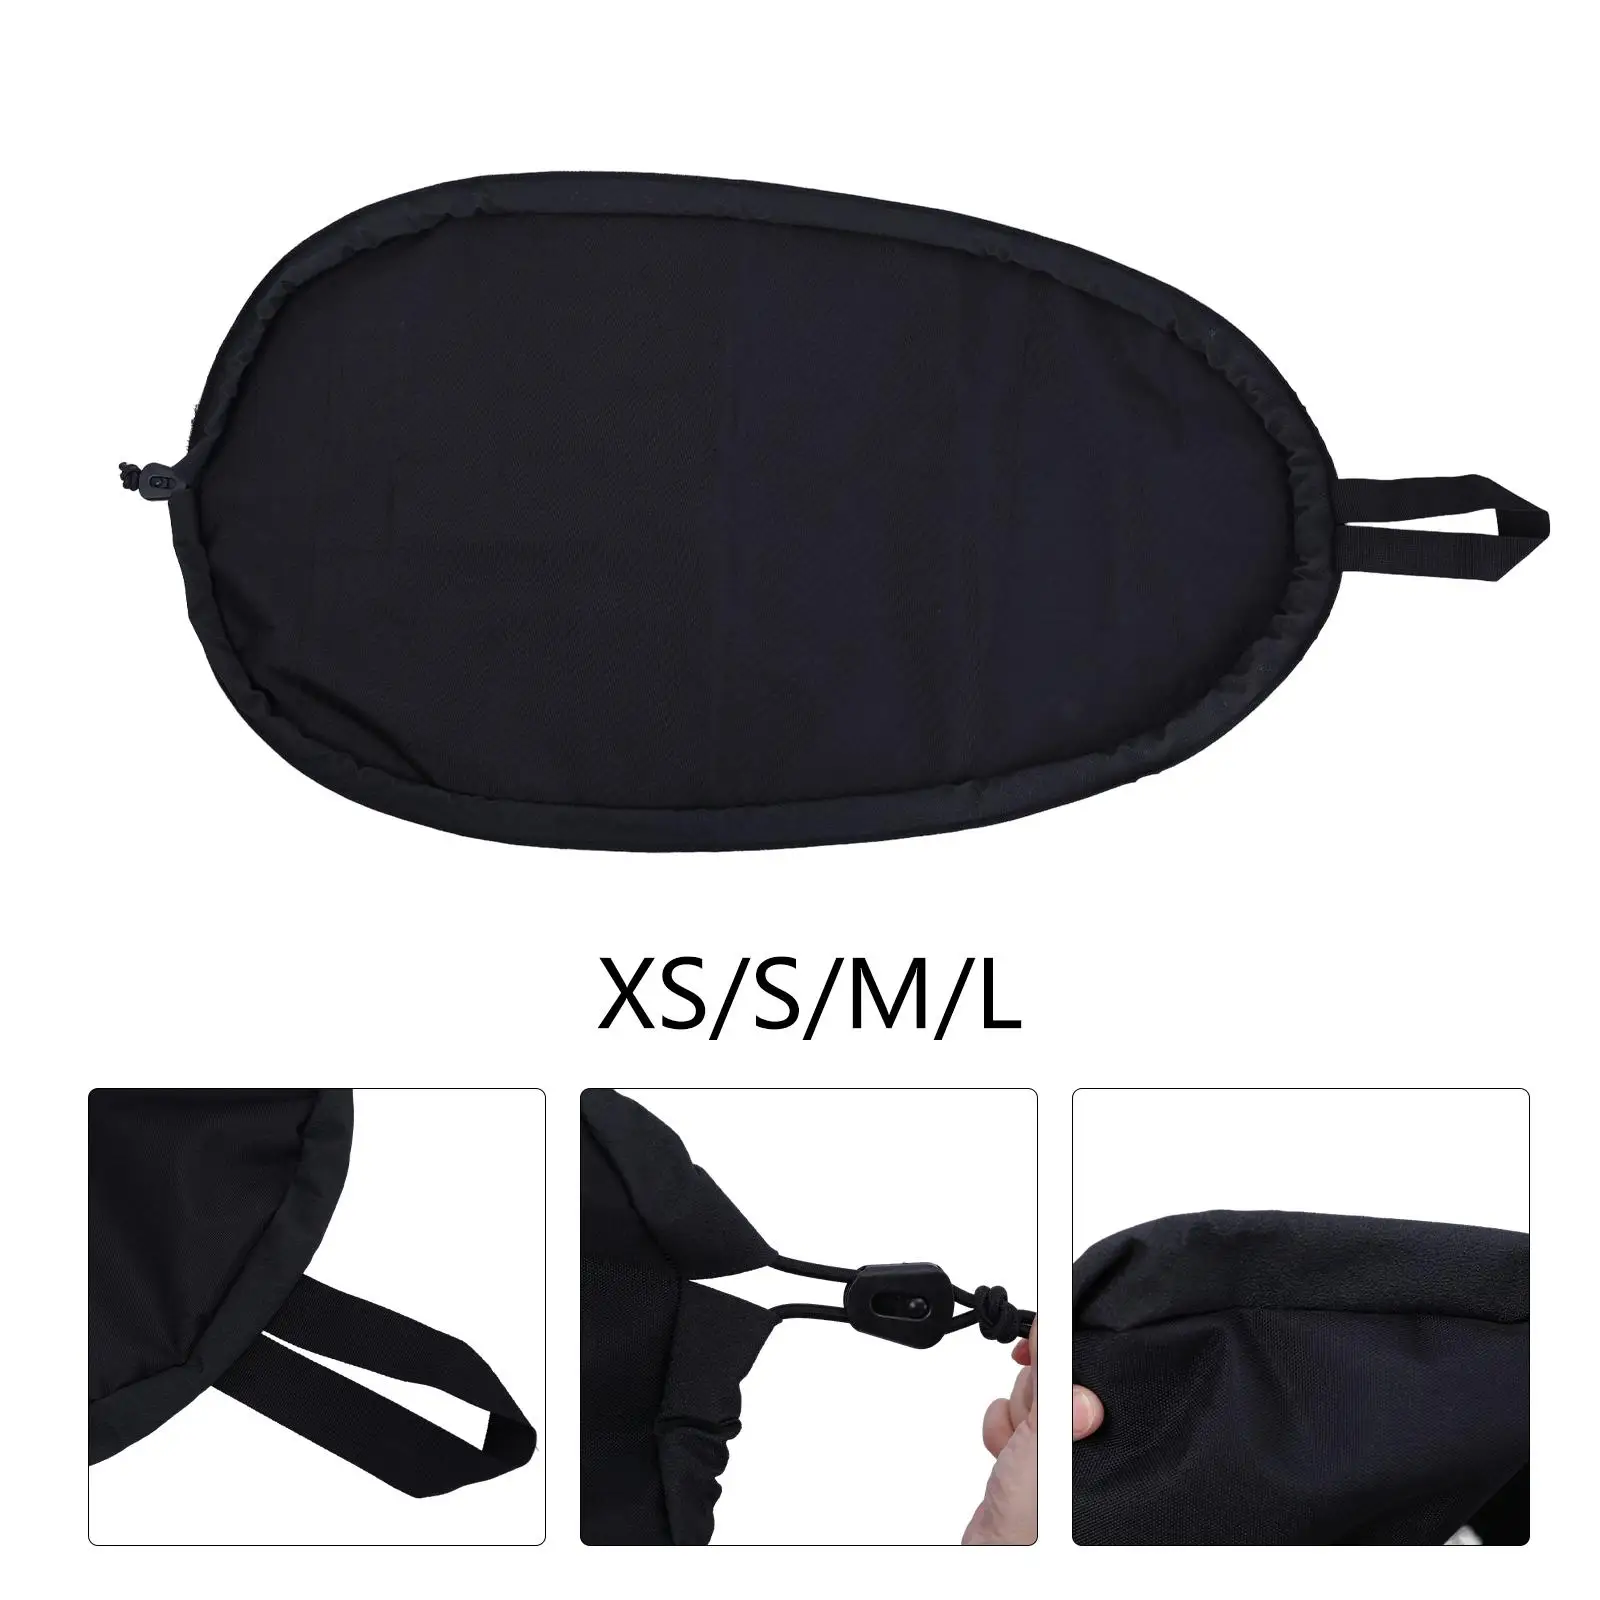 Kayak Cockpit Cover Cockpit Protector Waterproof Adjustable Sun Protection Dustproof 600D Oxford Cloth Seat Cover for Transport